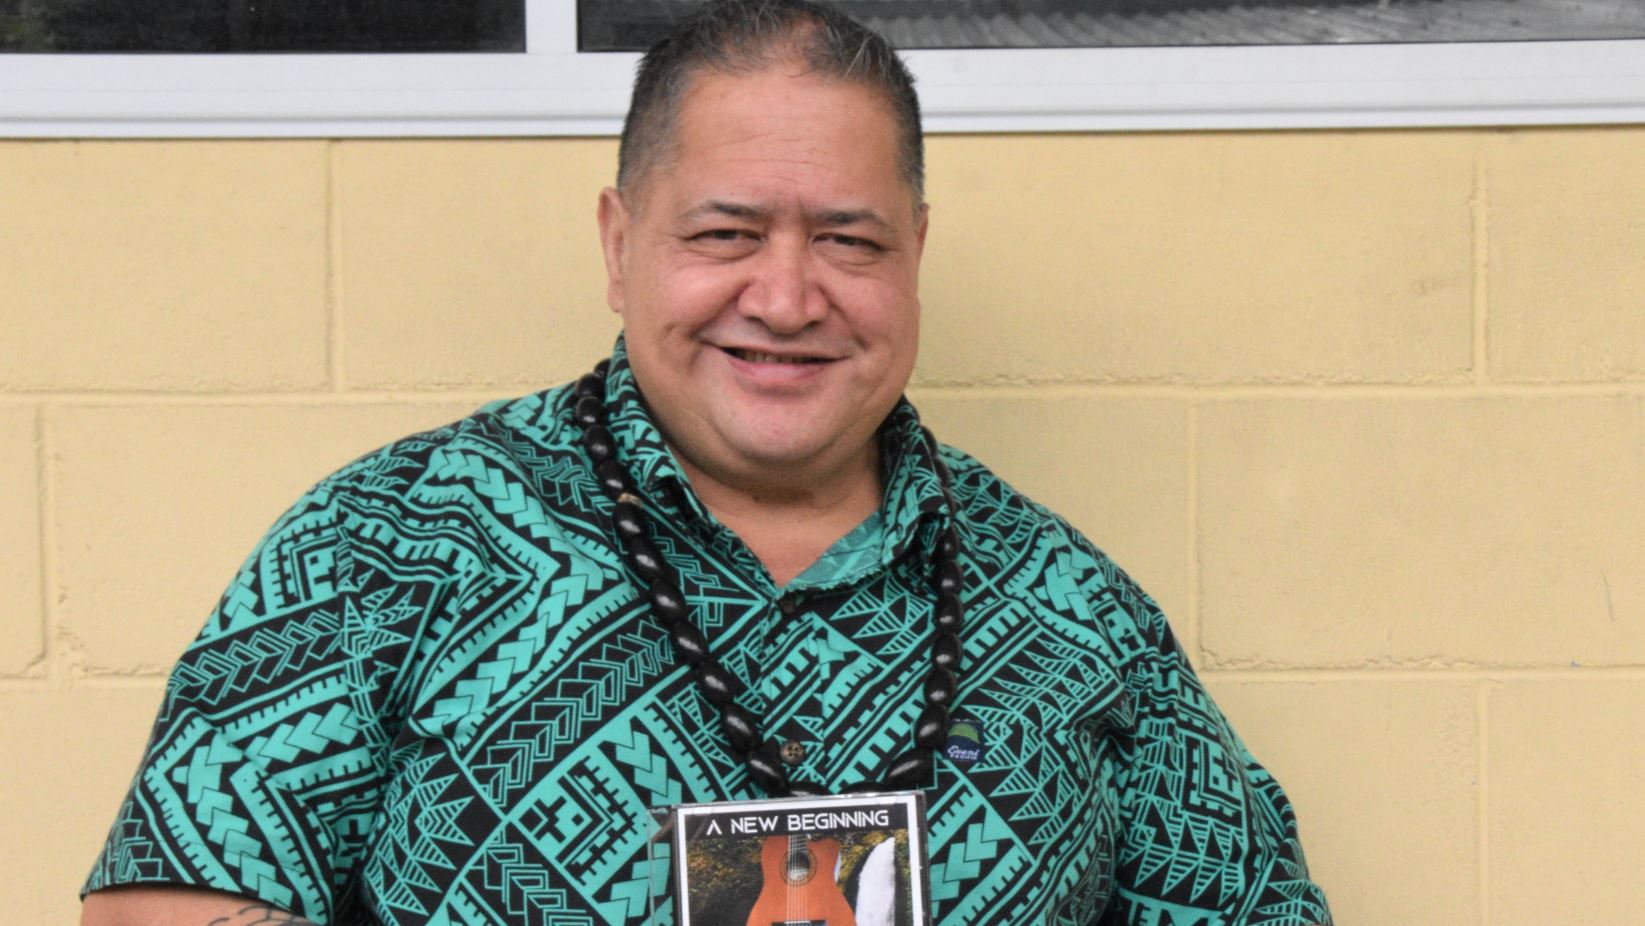 ‘A New Beginning’ for renowned Cook Islands musician